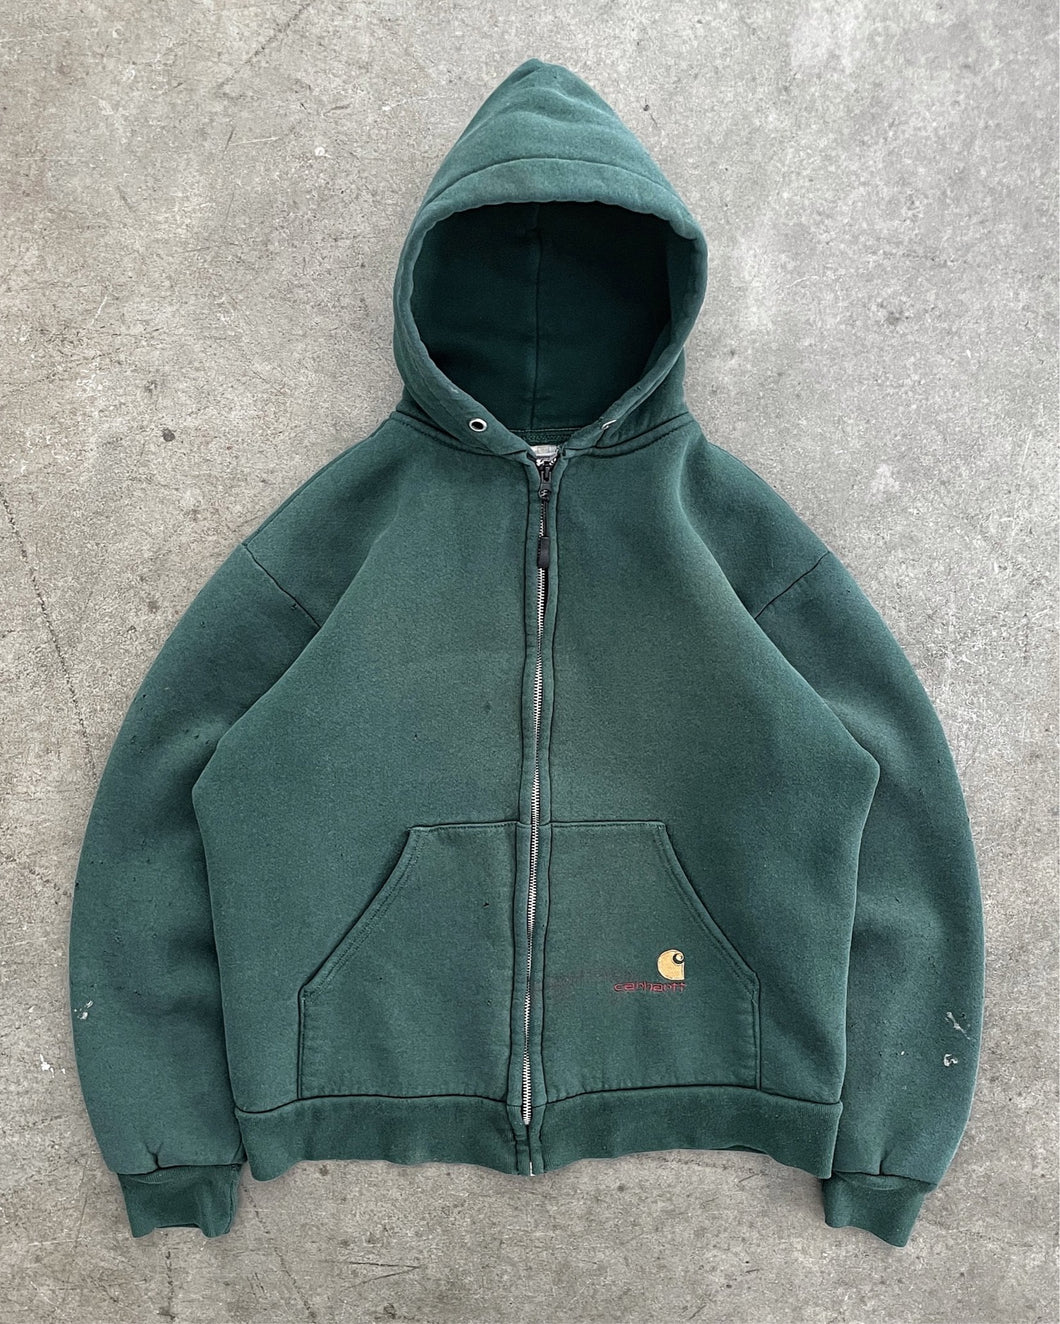 CARHARTT FADED GREEN THERMAL LINED ZIP UP HOODIE - 1980S